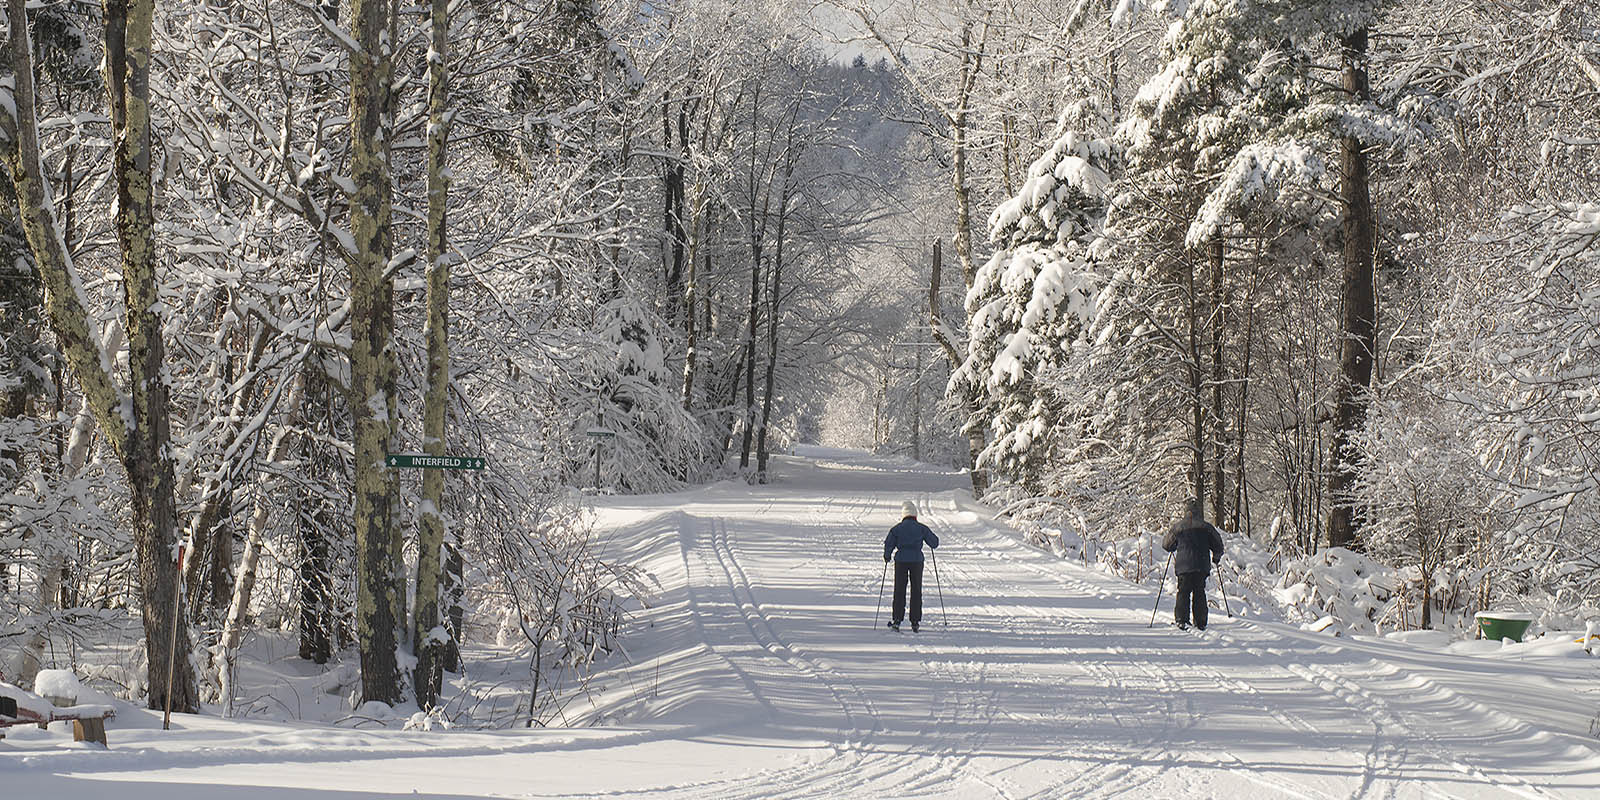 2 cross country skiers on groomed trails traveling through snow covered trees